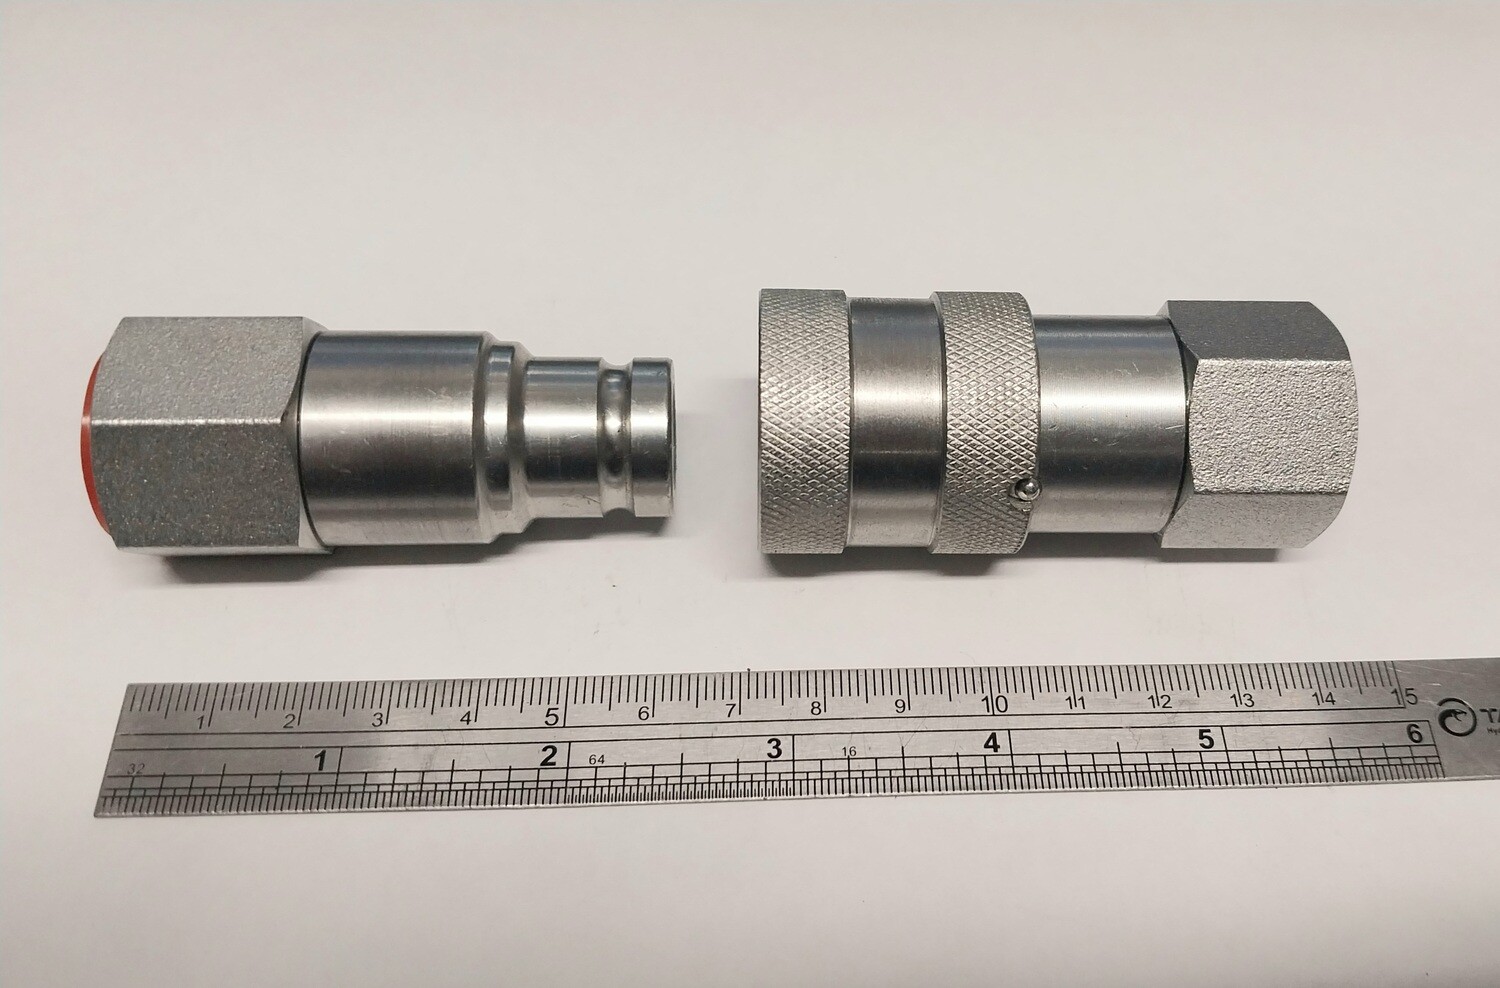 Top view of 3/8 flat face Hydraulic couplers verticle next to each other. 